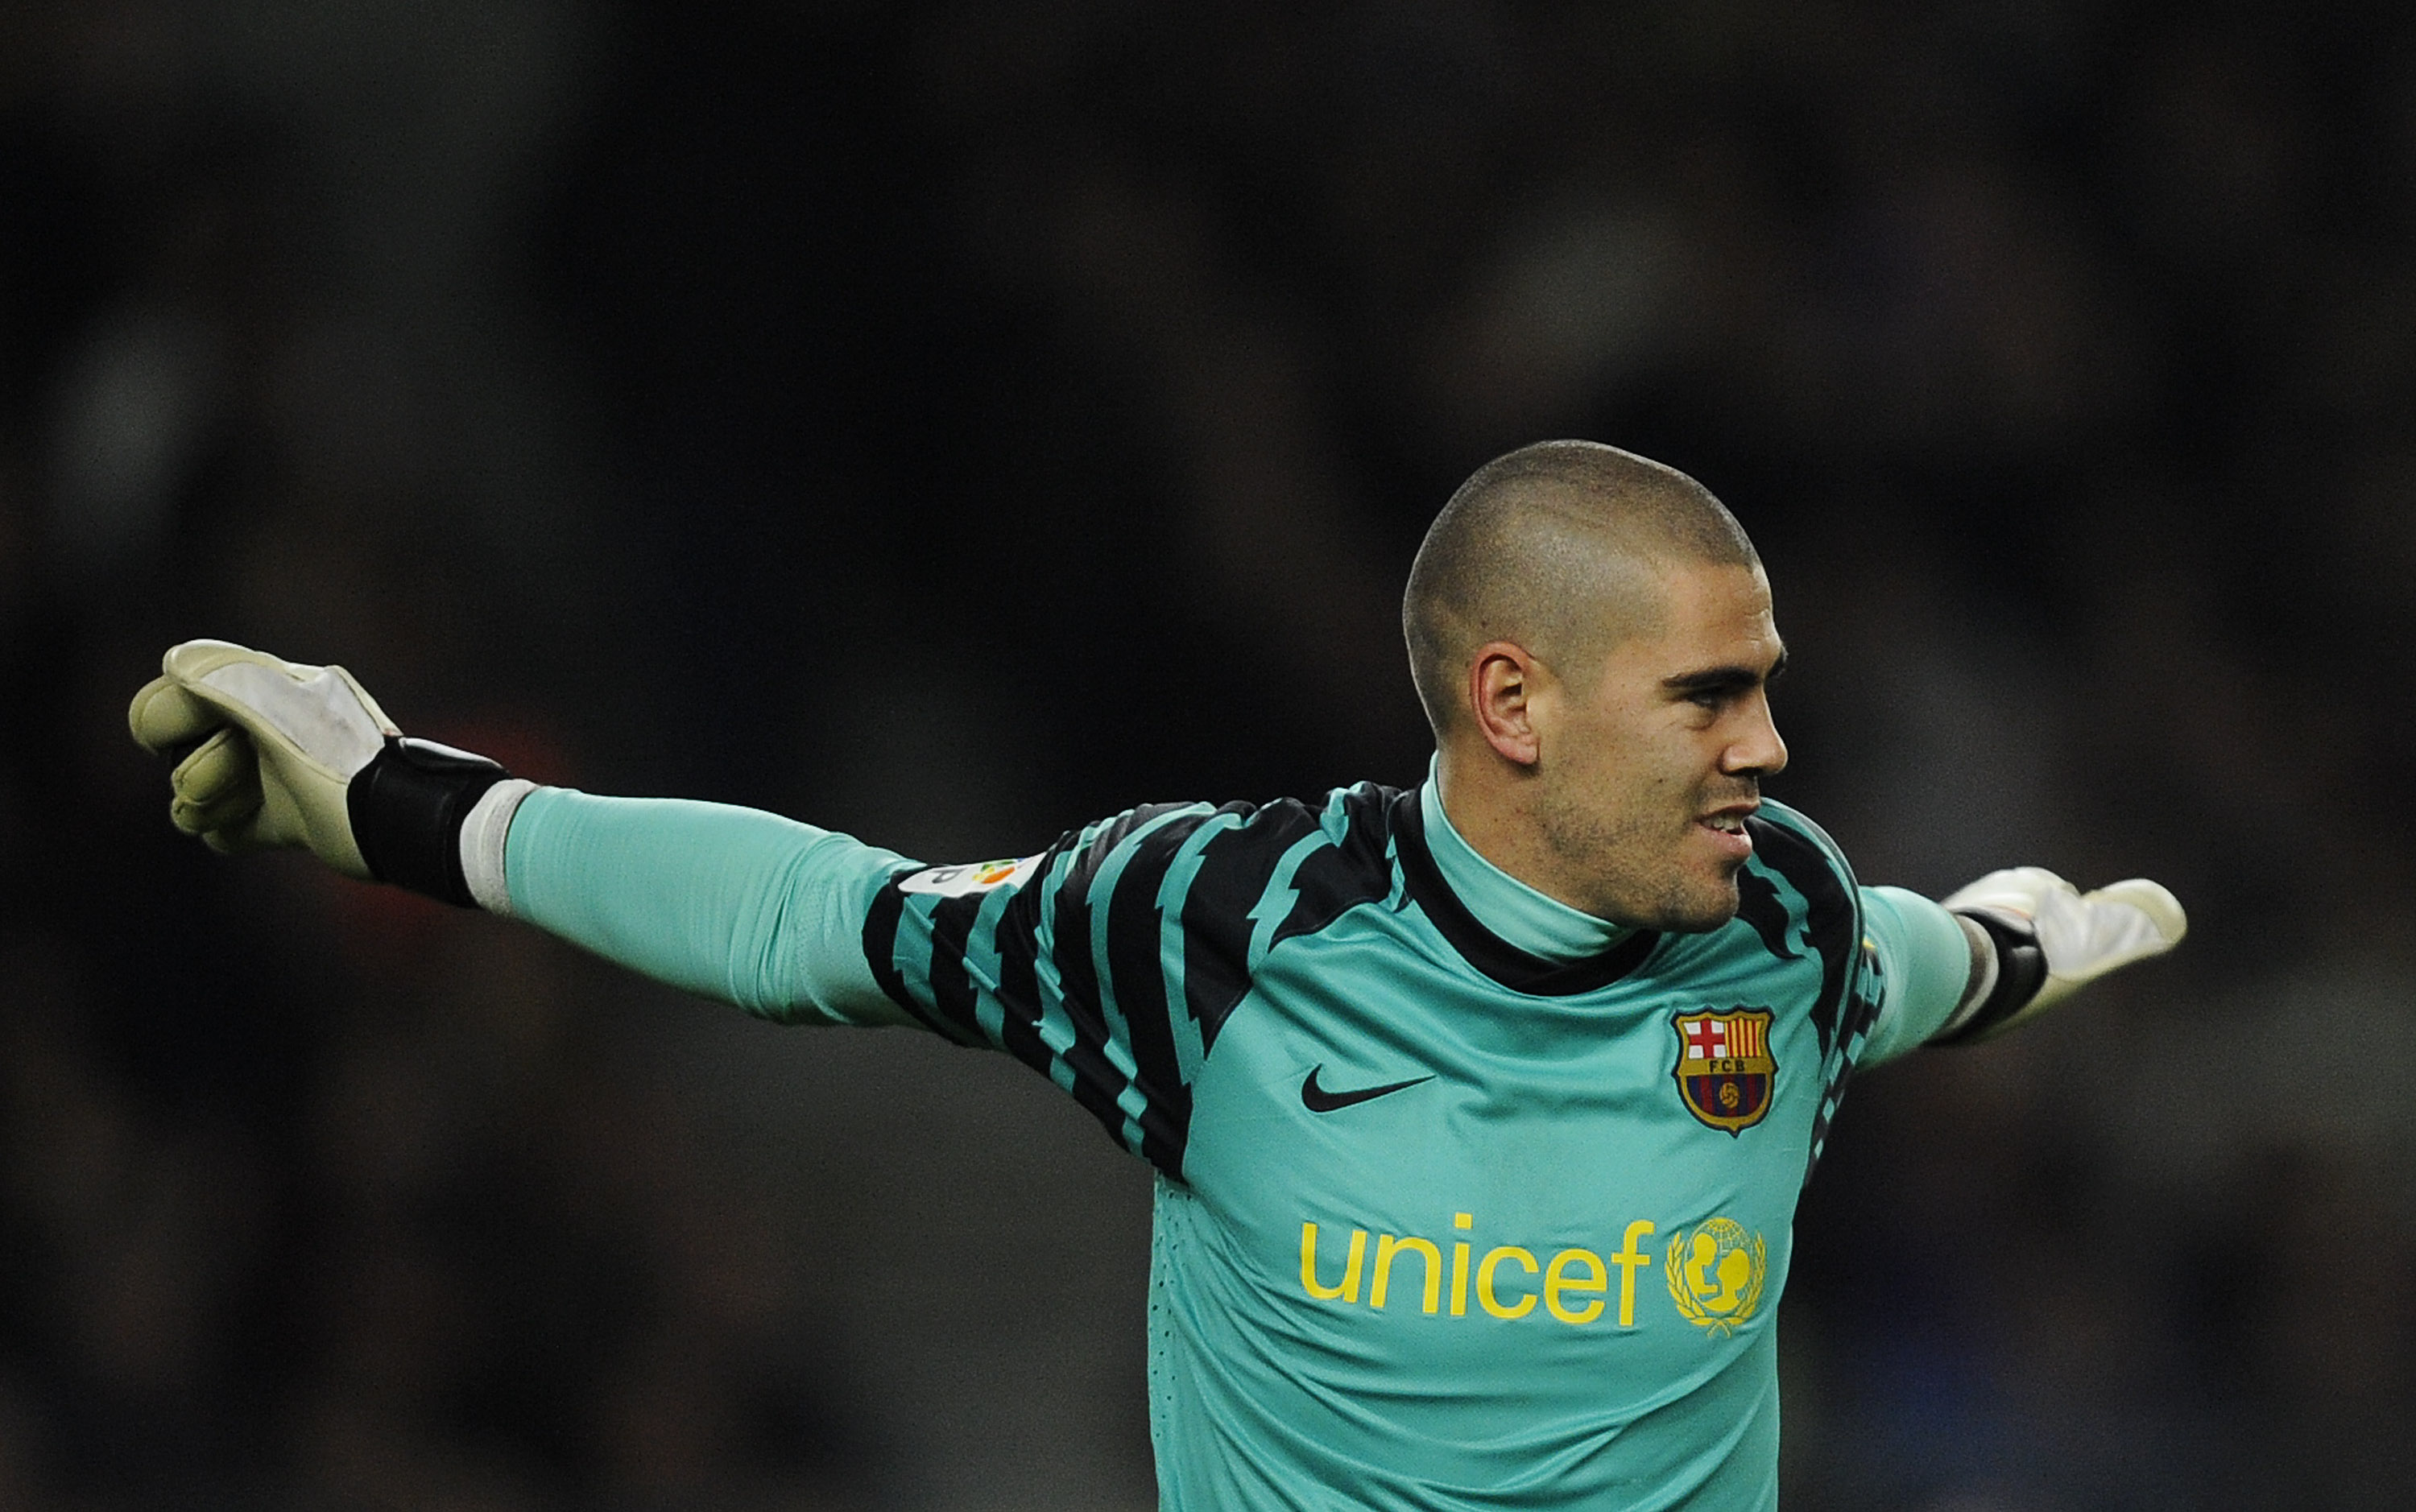 BARCELONA, SPAIN - MARCH 05:  Victor Valdes of FC Barcelona looks on during the La liga match between Barcelona and Real Zaragoza at Camp Nou on March 5, 2011 in Barcelona, Spain. Barcelona won 1-0.  (Photo by David Ramos/Getty Images)